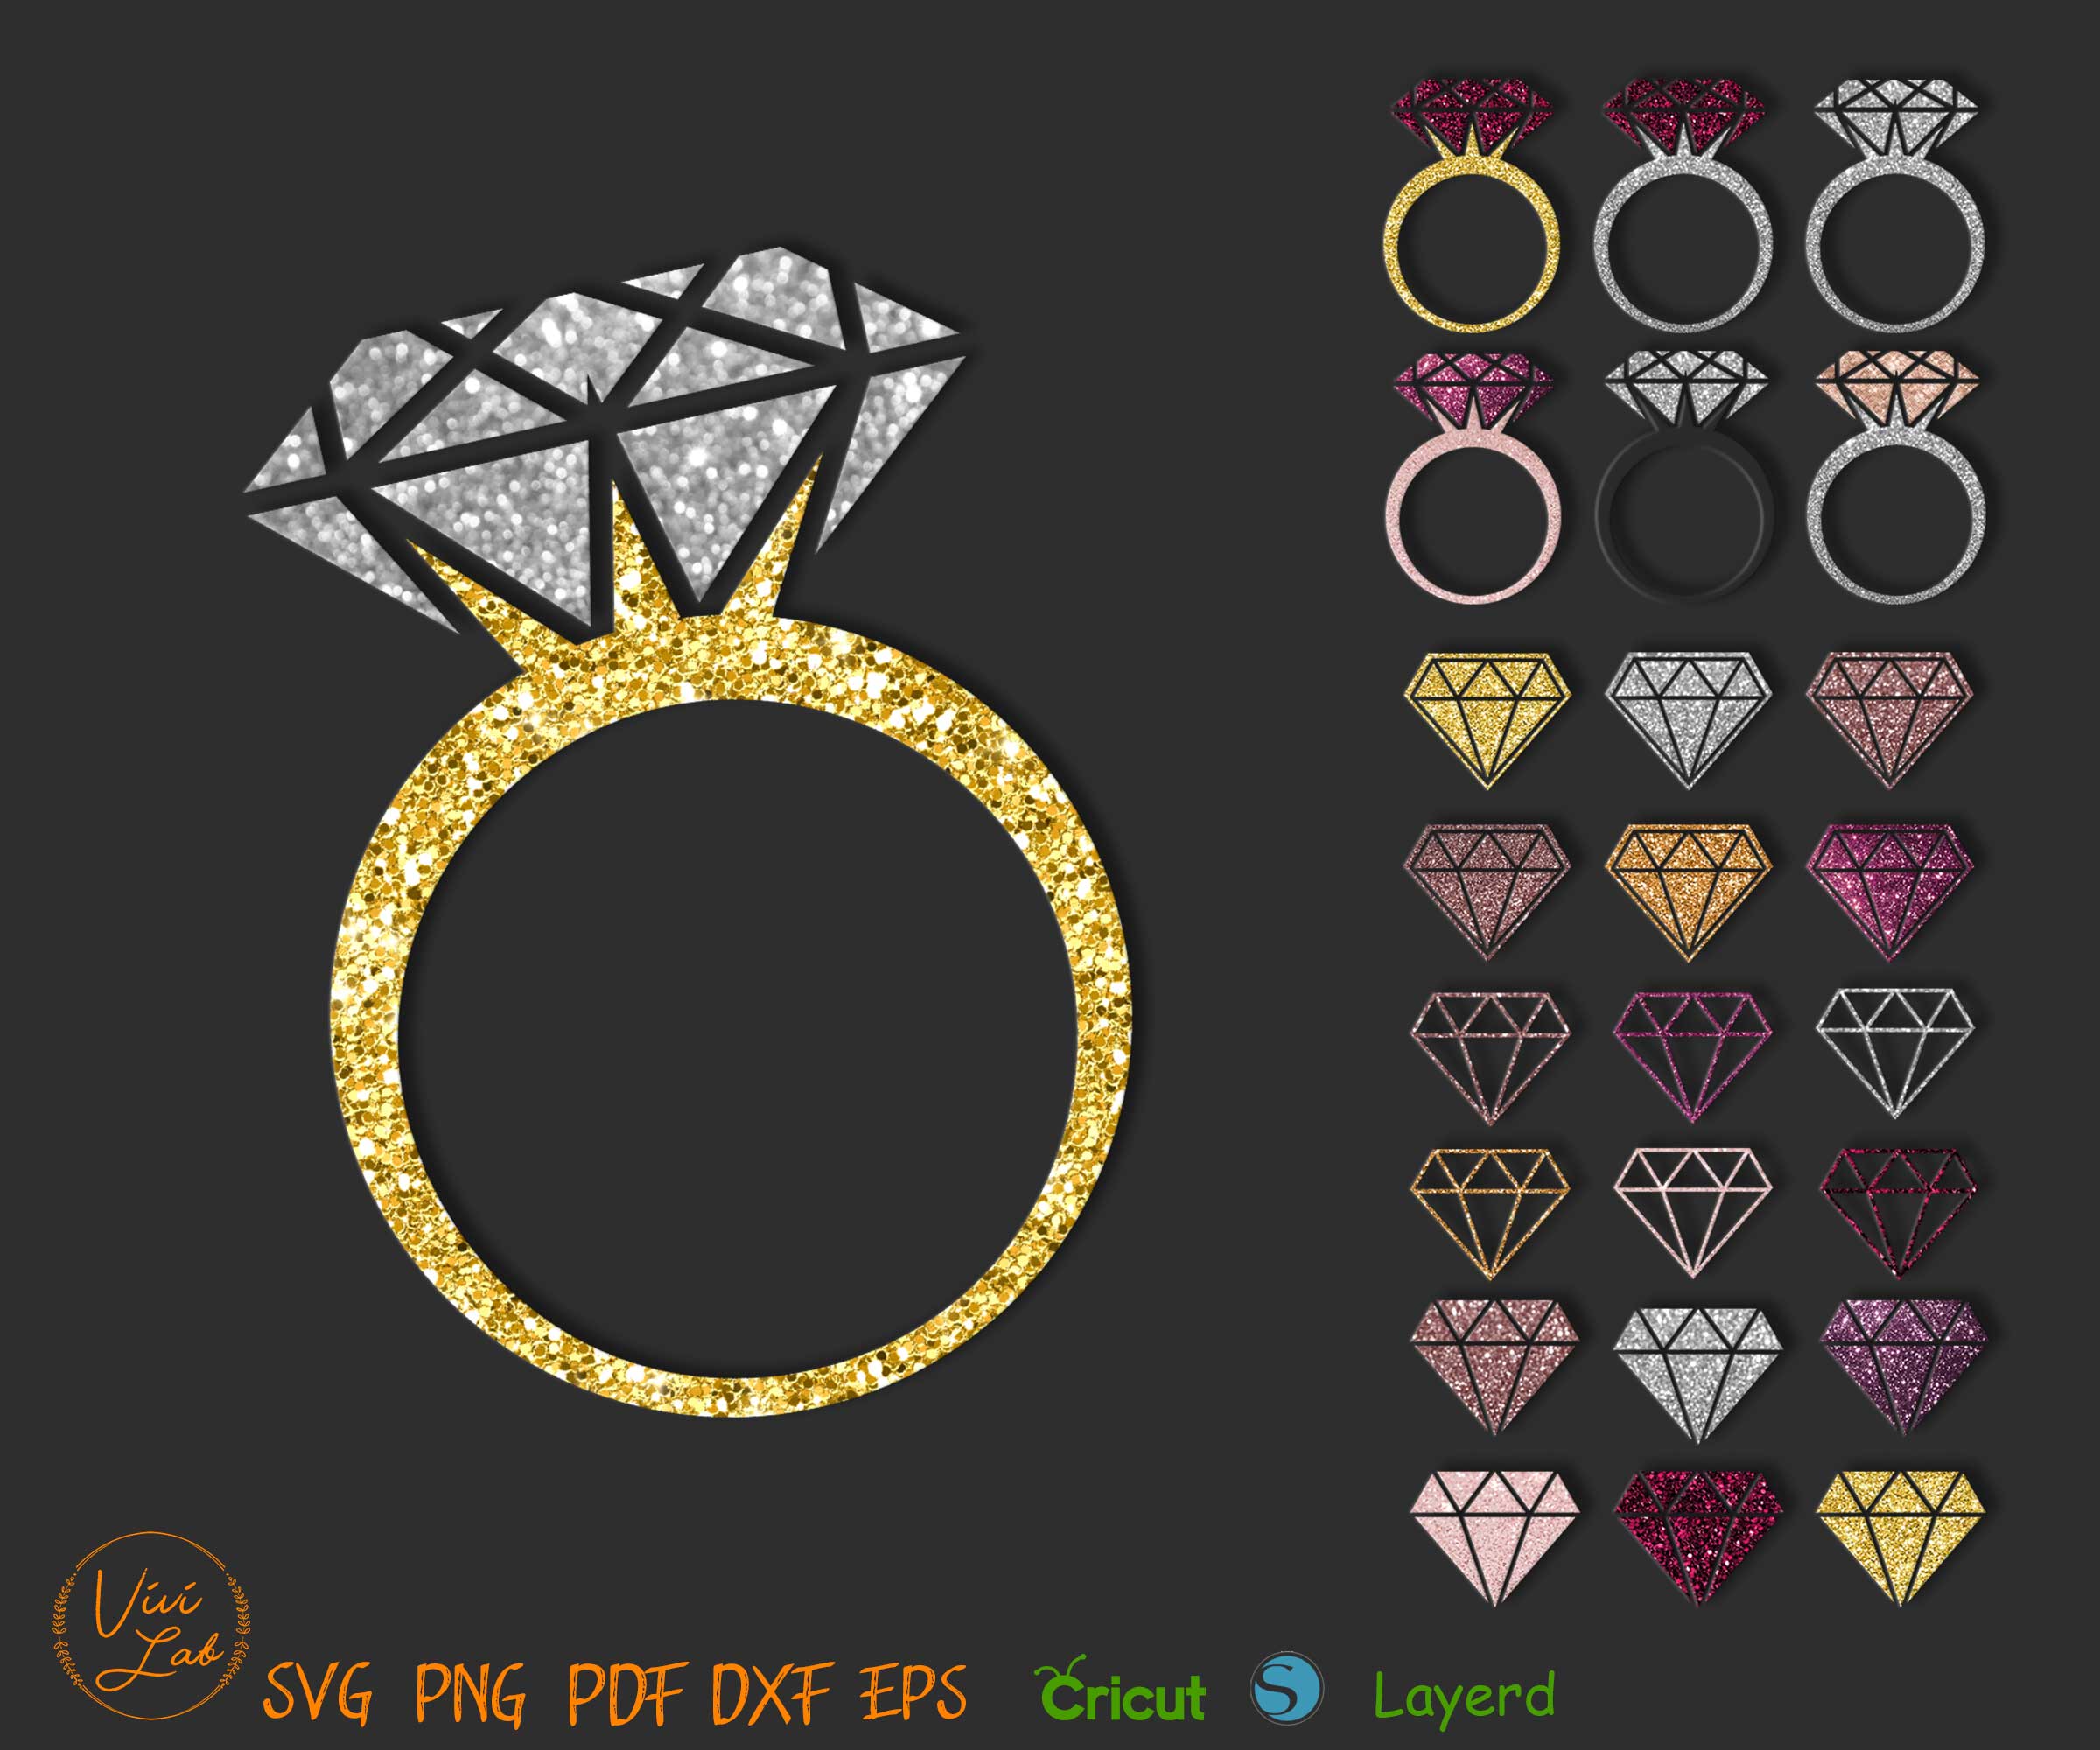 Ring and Diamond svg with Glitter patterns for Wedding card design